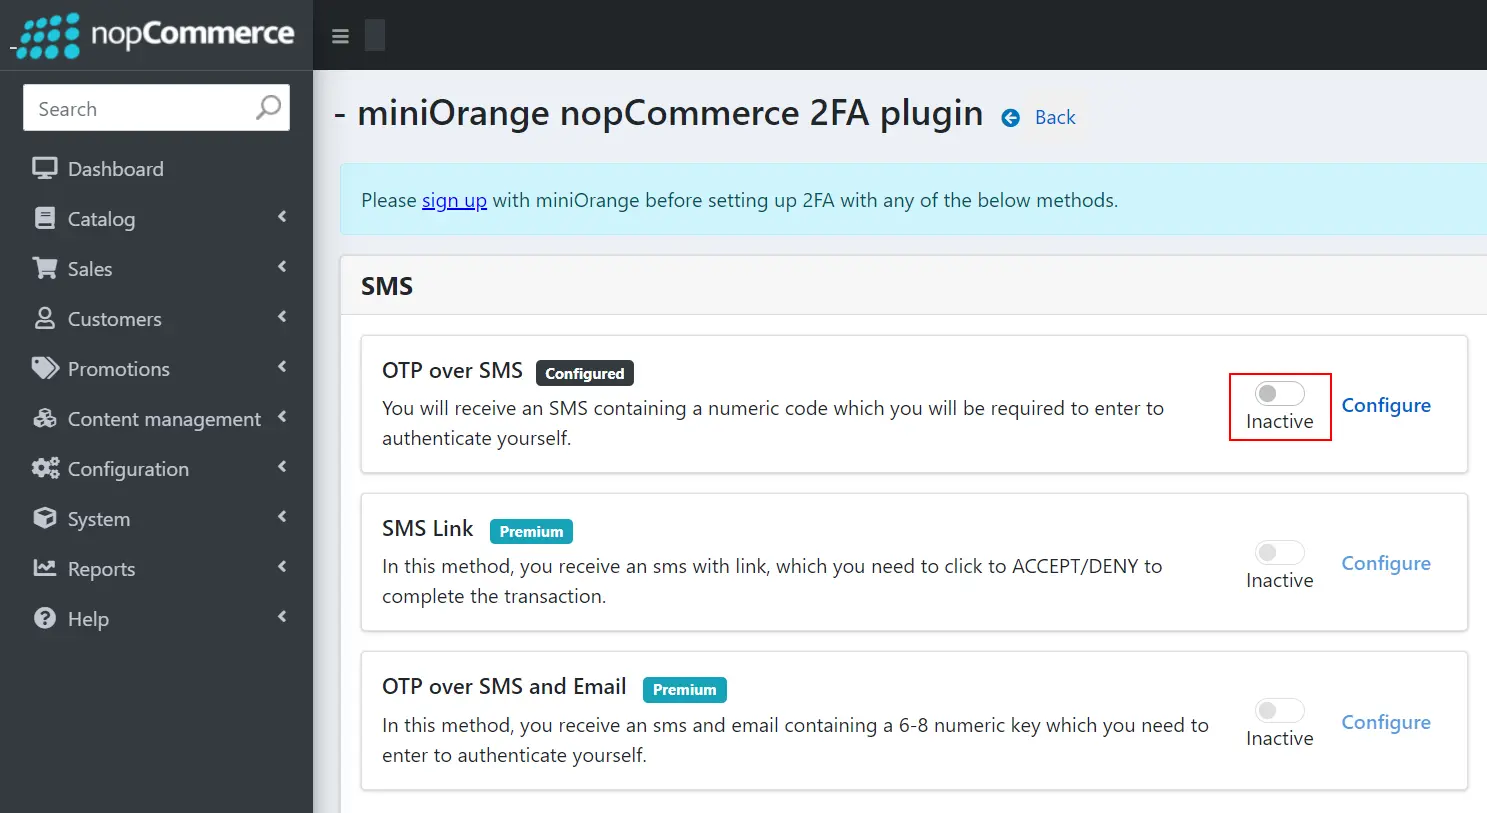 nopCommerce Two-factor Authentication using OTP over SMS | nopCommerce 2FA - Verify OTP over SMS Passcode